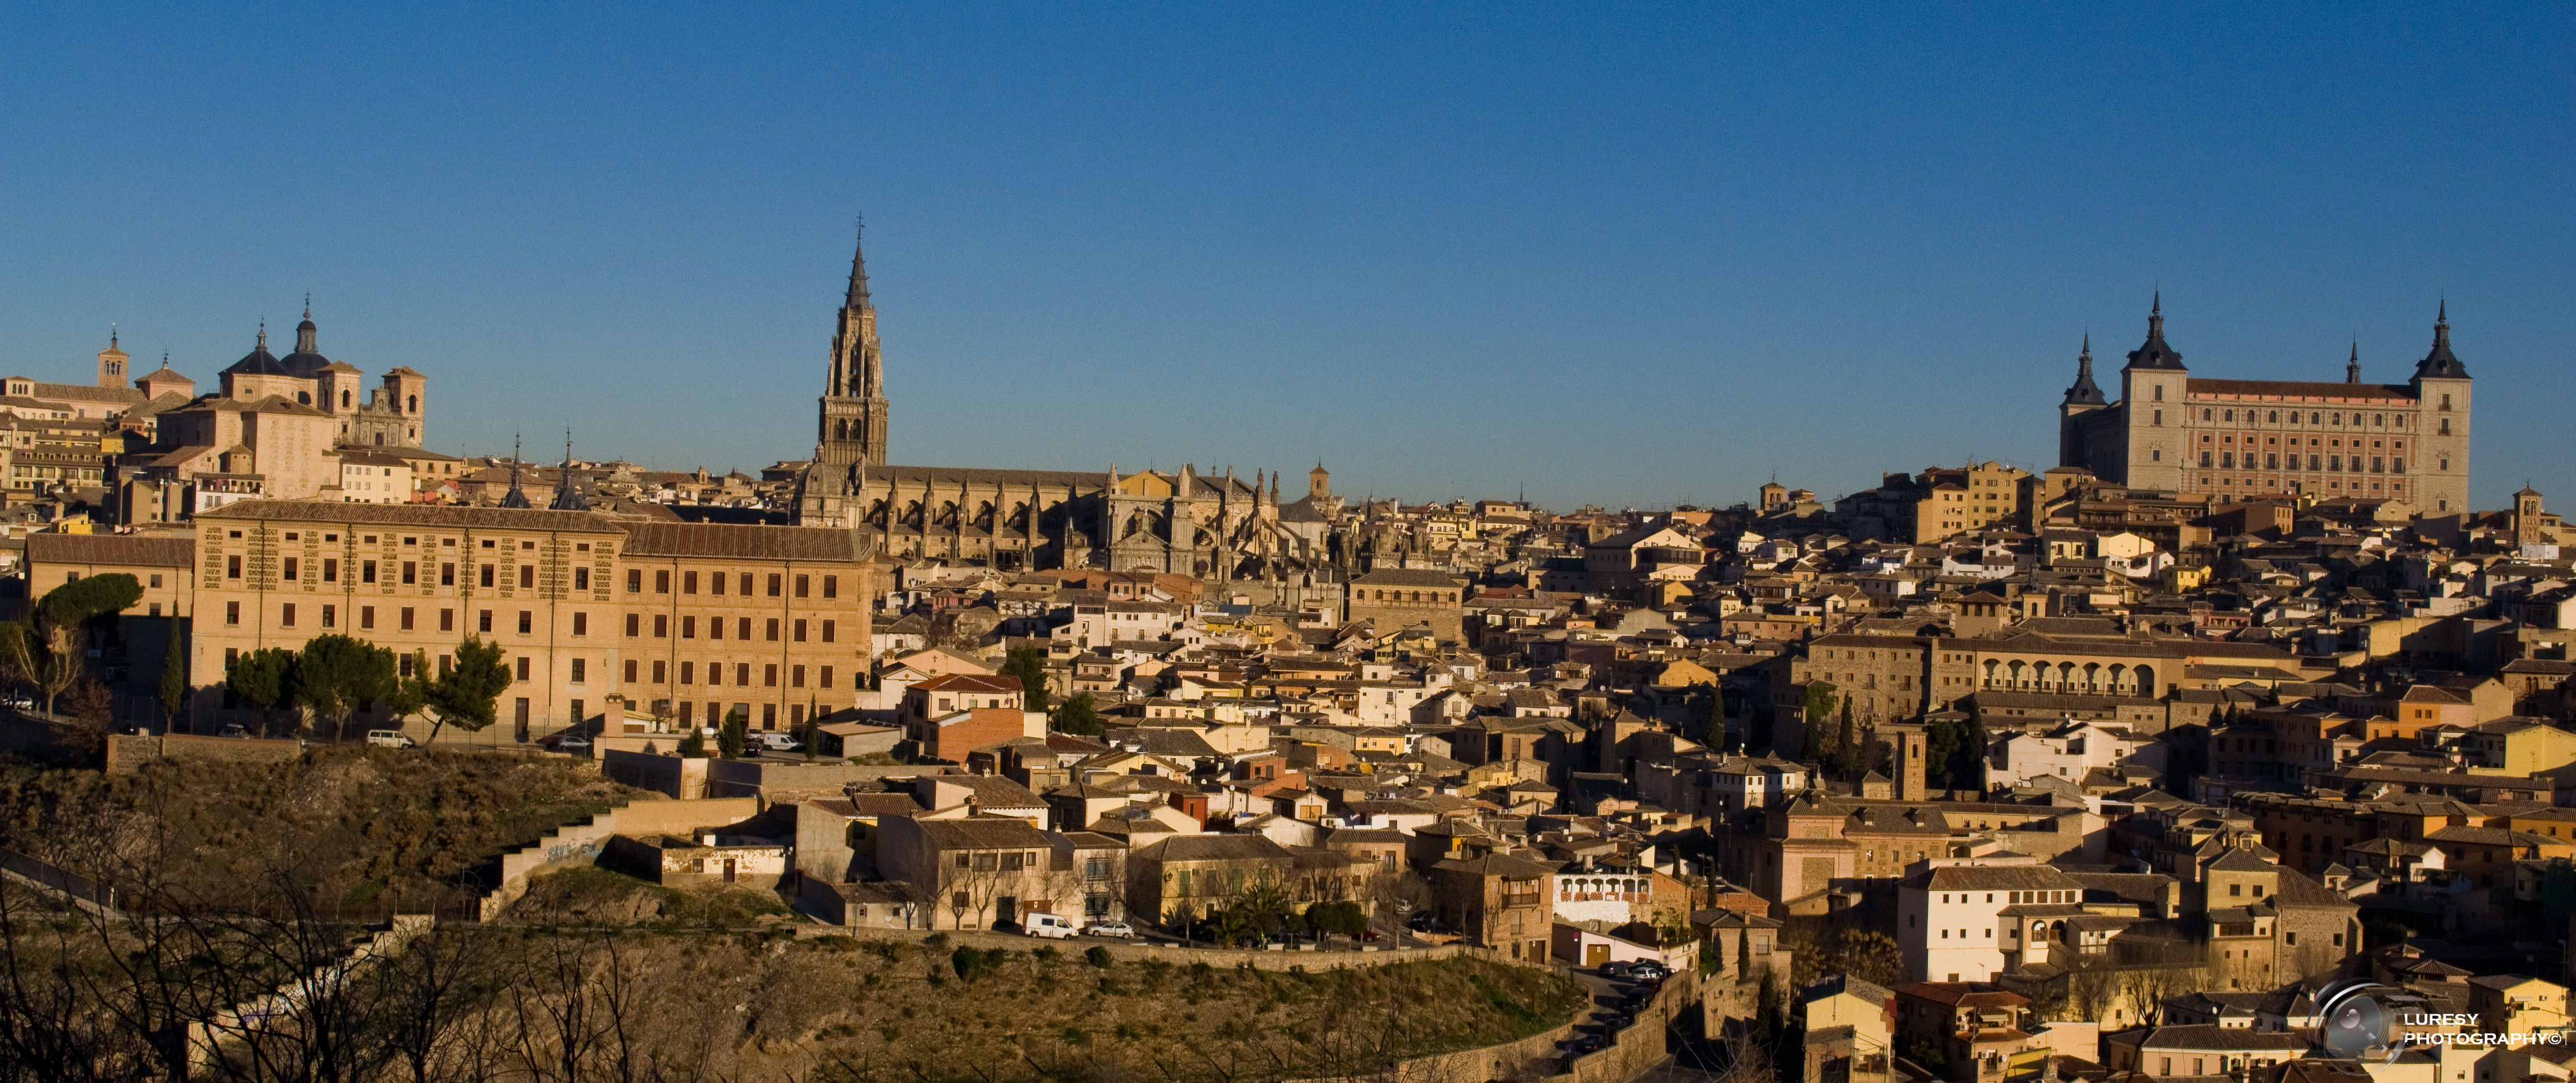 Panoramic view of Toledo, Spain (luresy, Flickr)